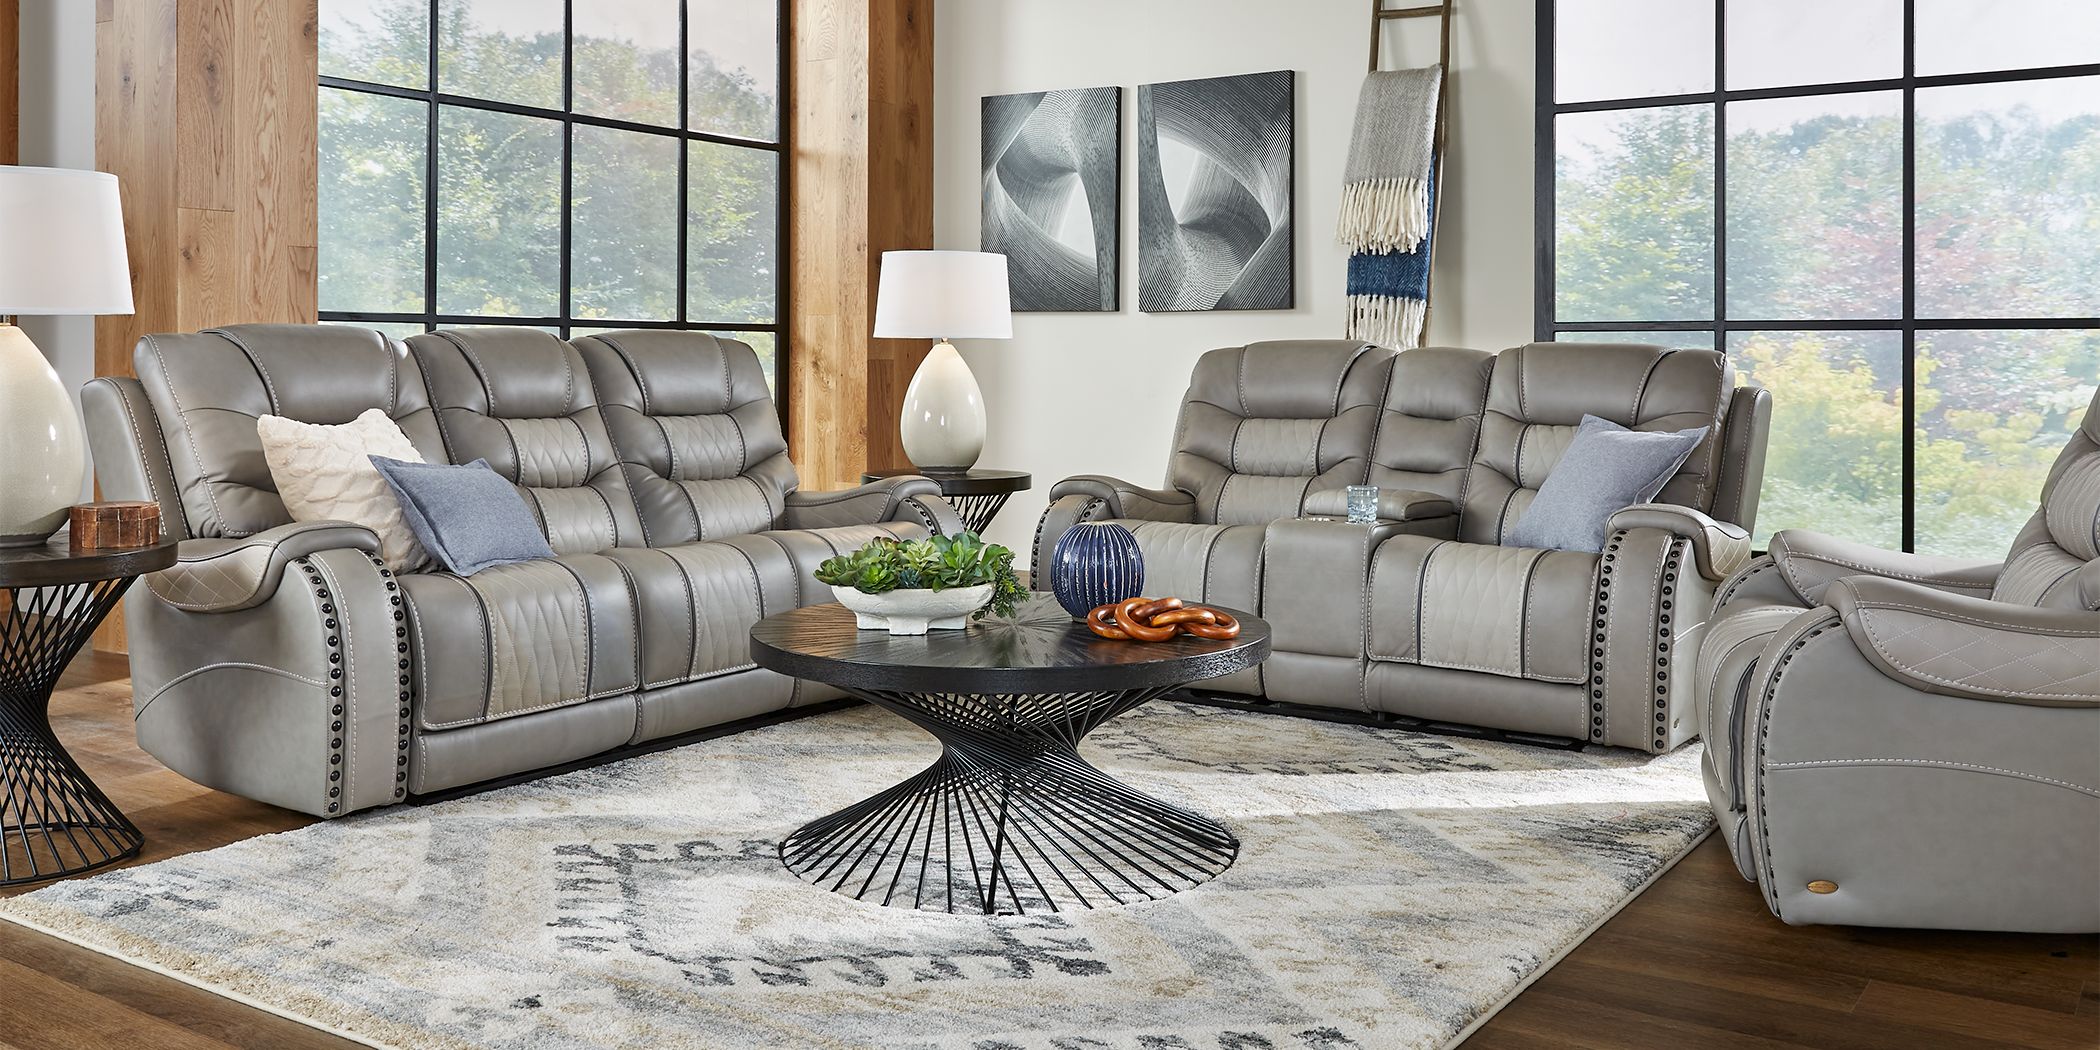 Eric Church Highway To Home Headliner Gray Leather 3 Pc Reclining